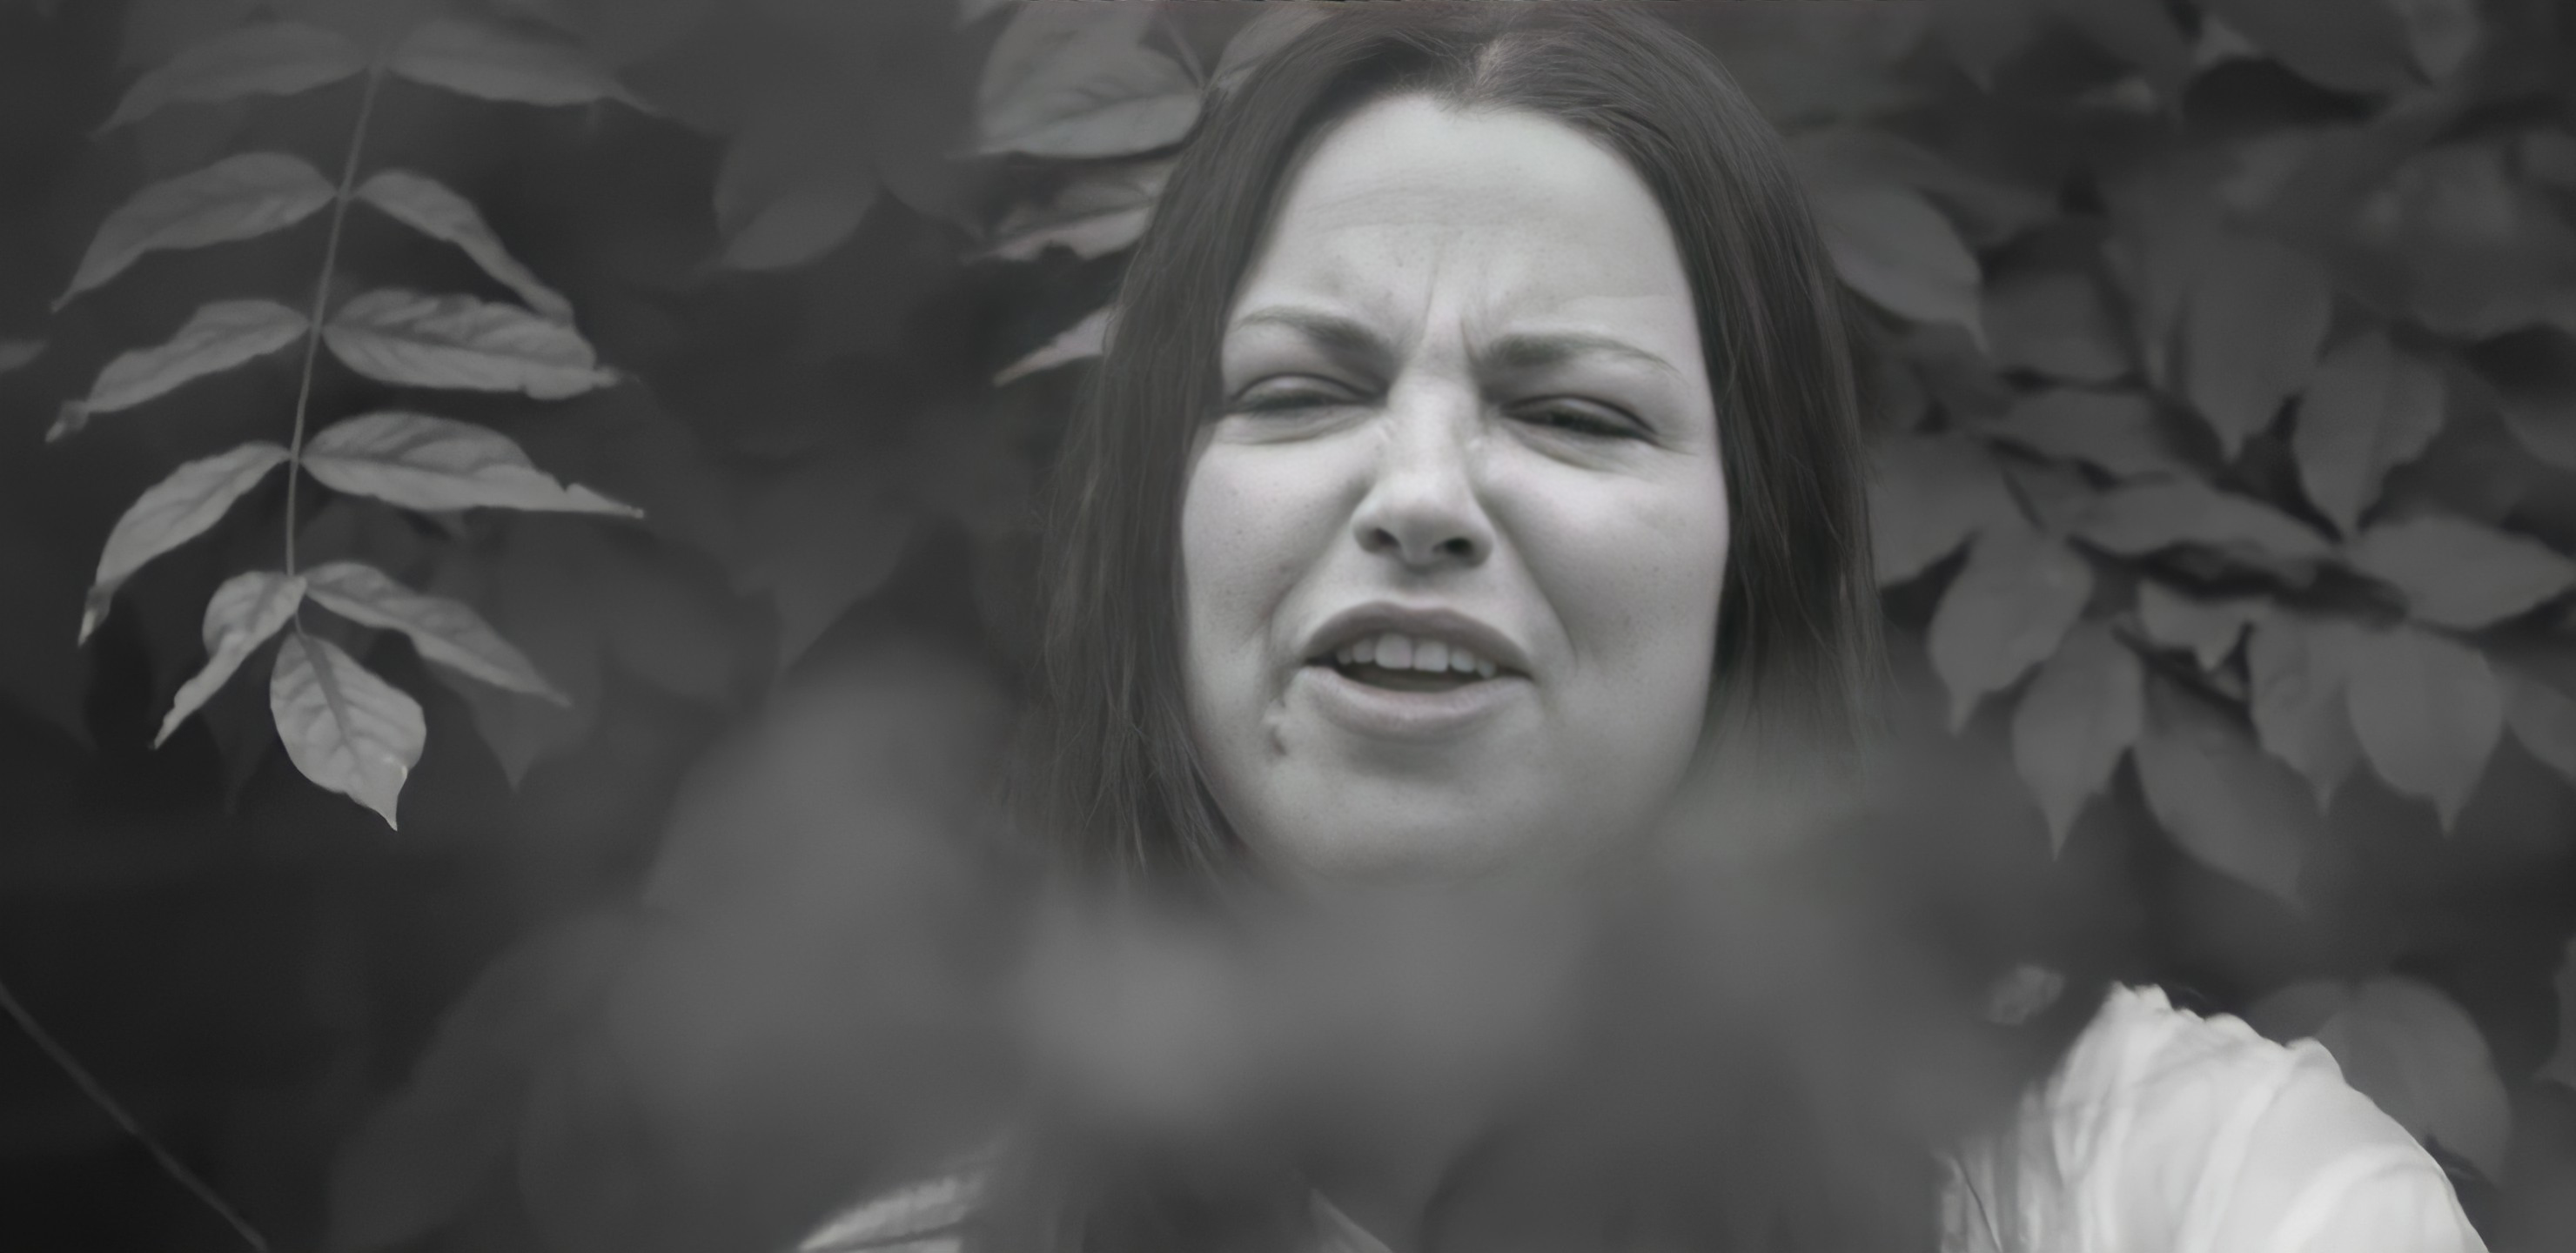 2960x1440
Keywords: amy lee;going to california;video;recover